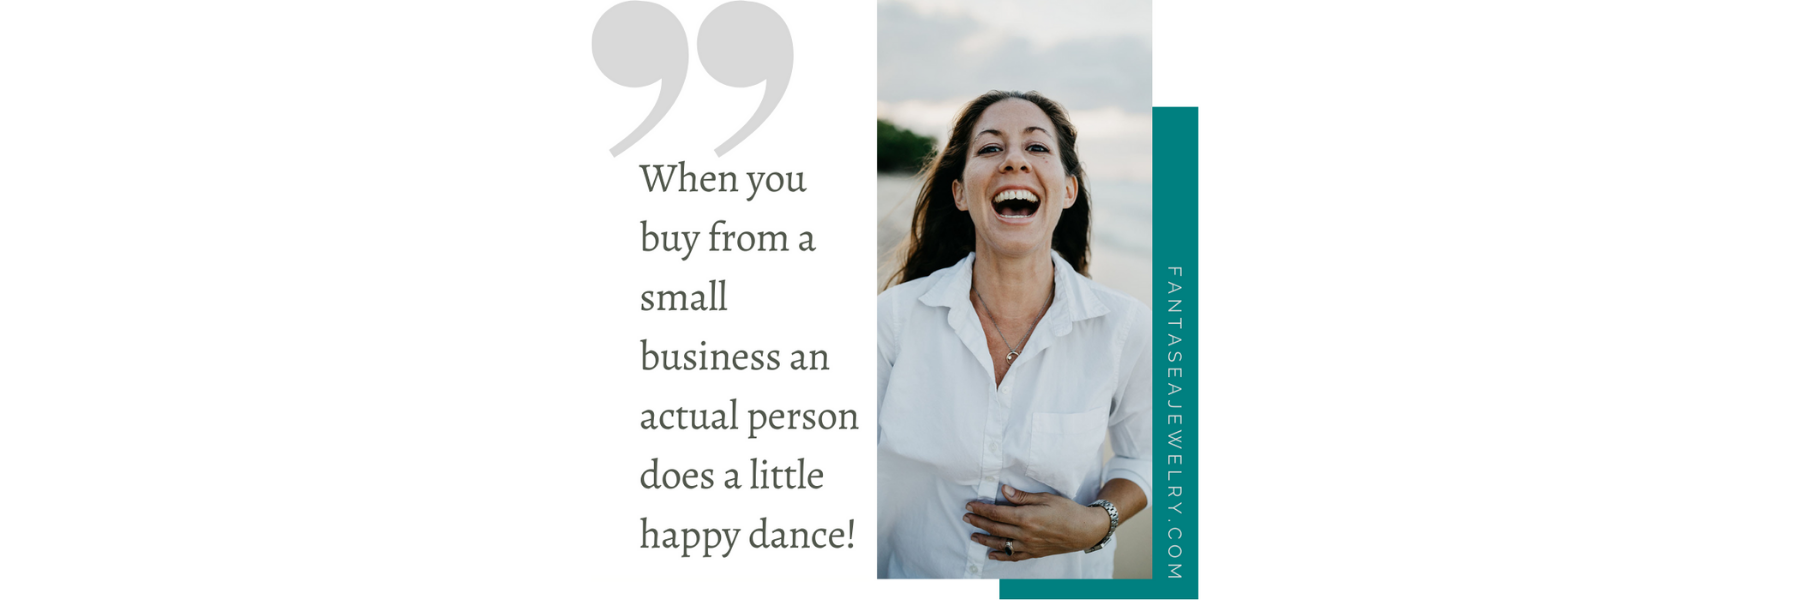 When You Buy From a Small Business an Actual Person Does a Little Happy Dance